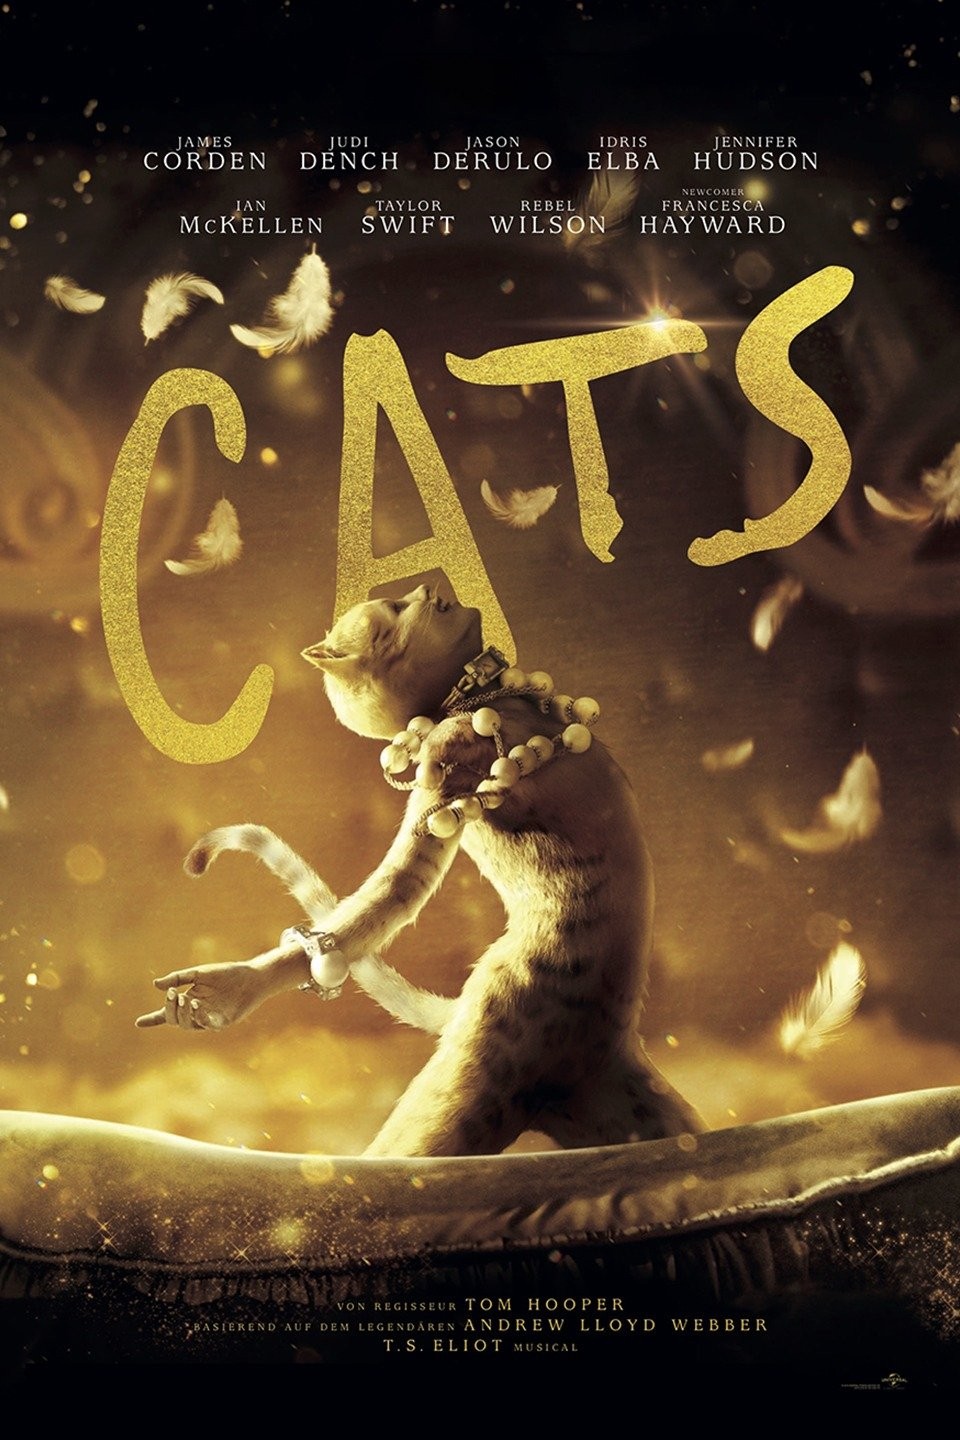 CATS voted best musical